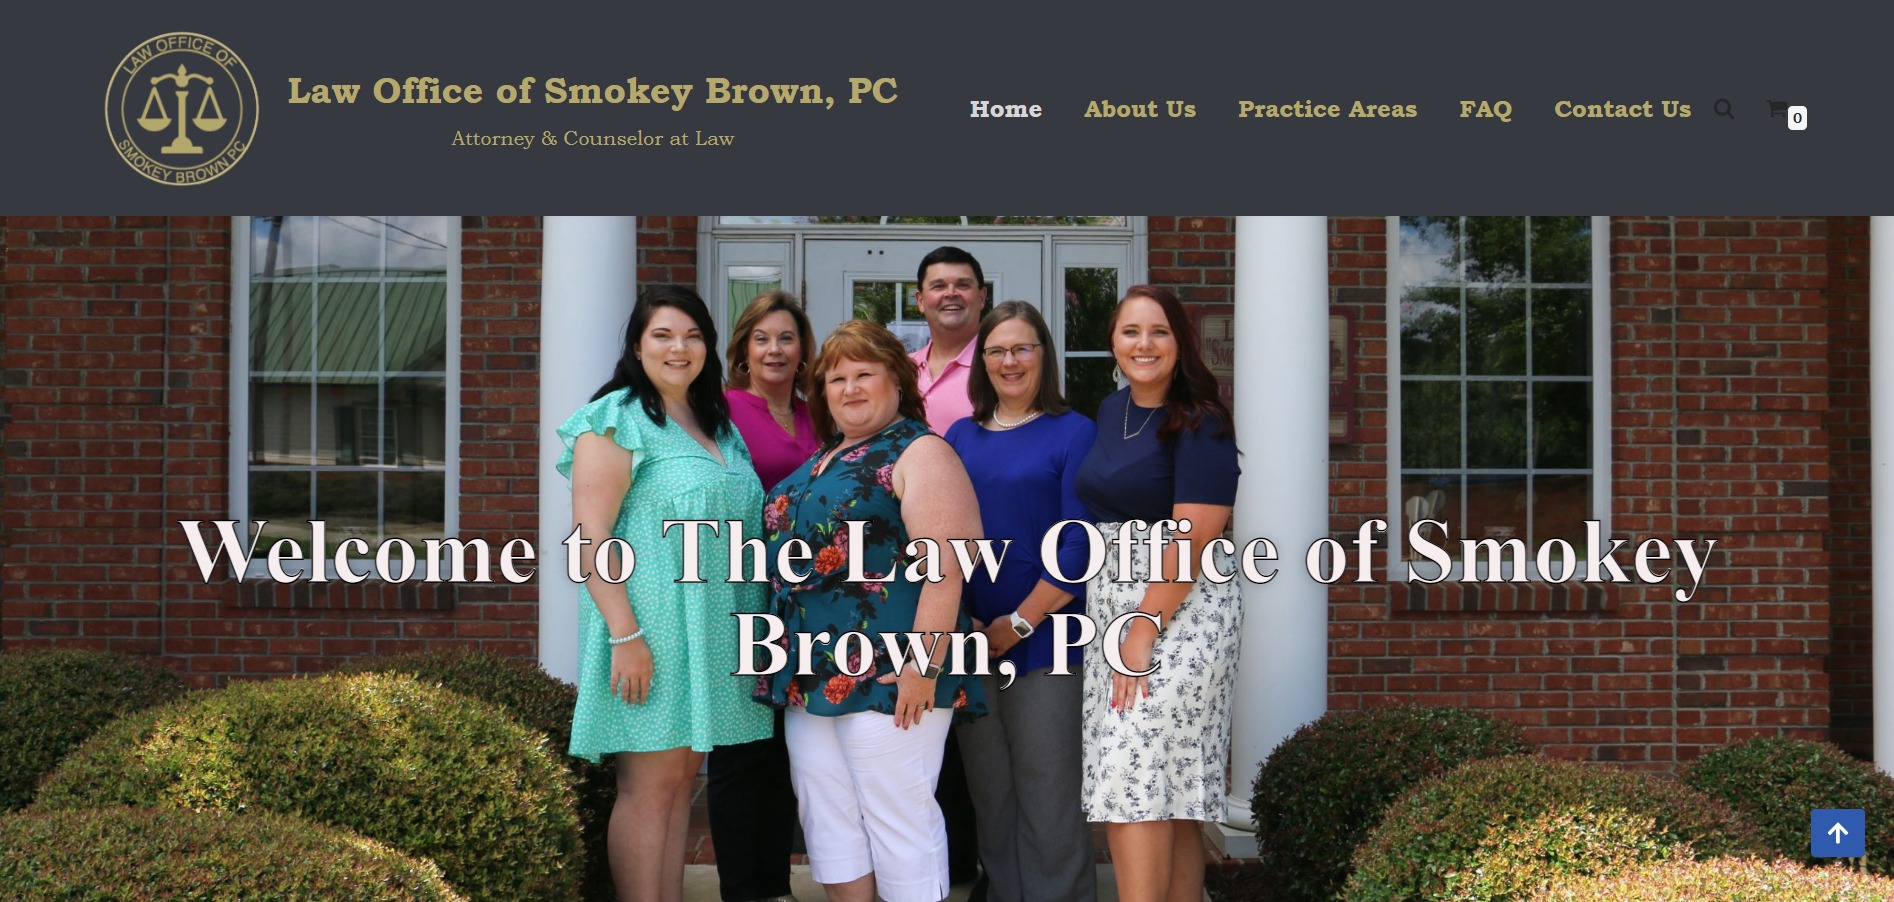 Law Office of Smokey Brown - Corporate Lawyers in Irmo SC